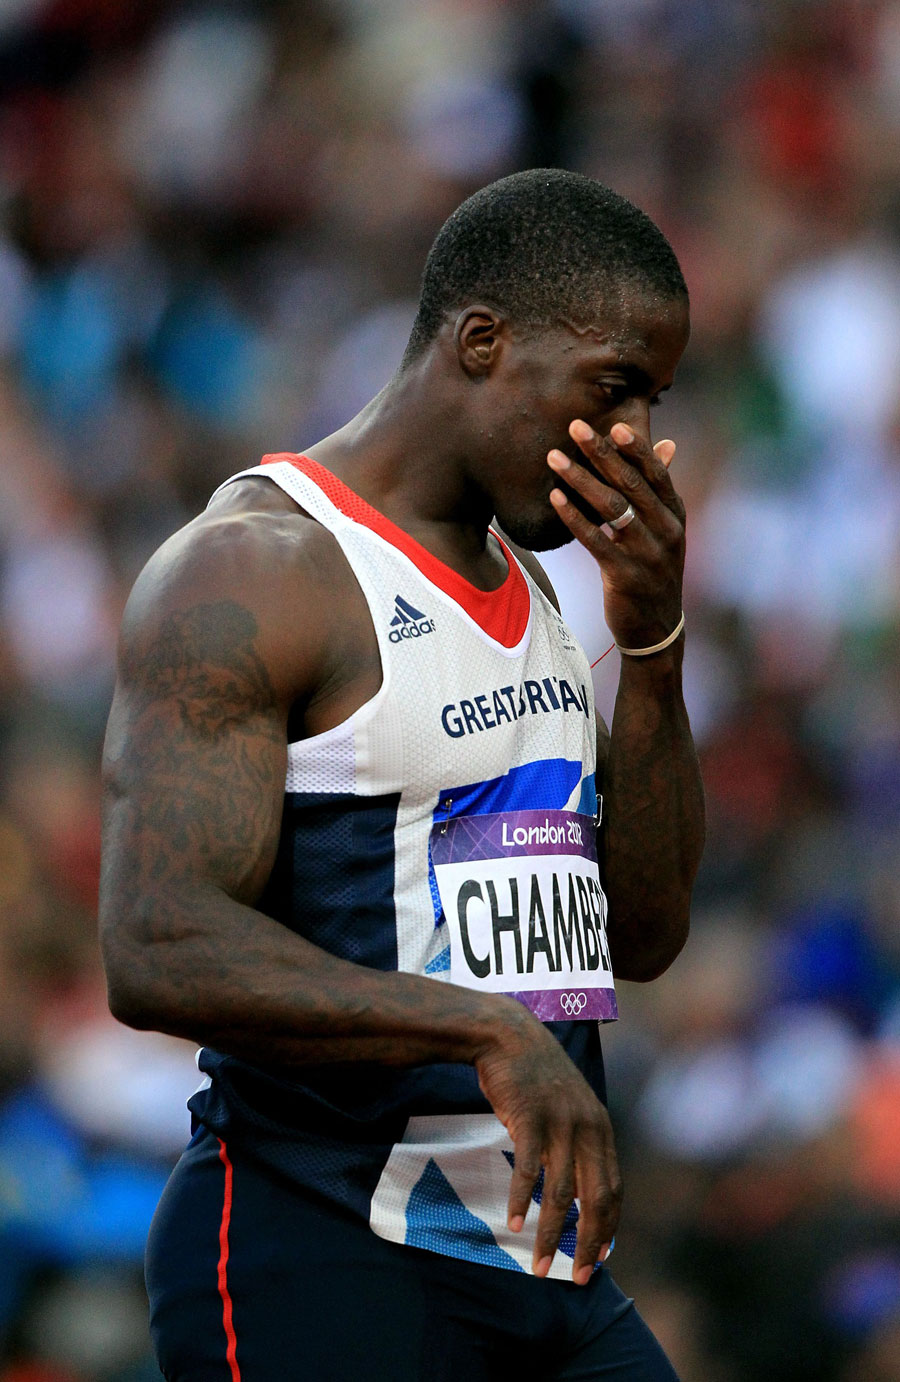 Dwain Chambers reacts with disappointment